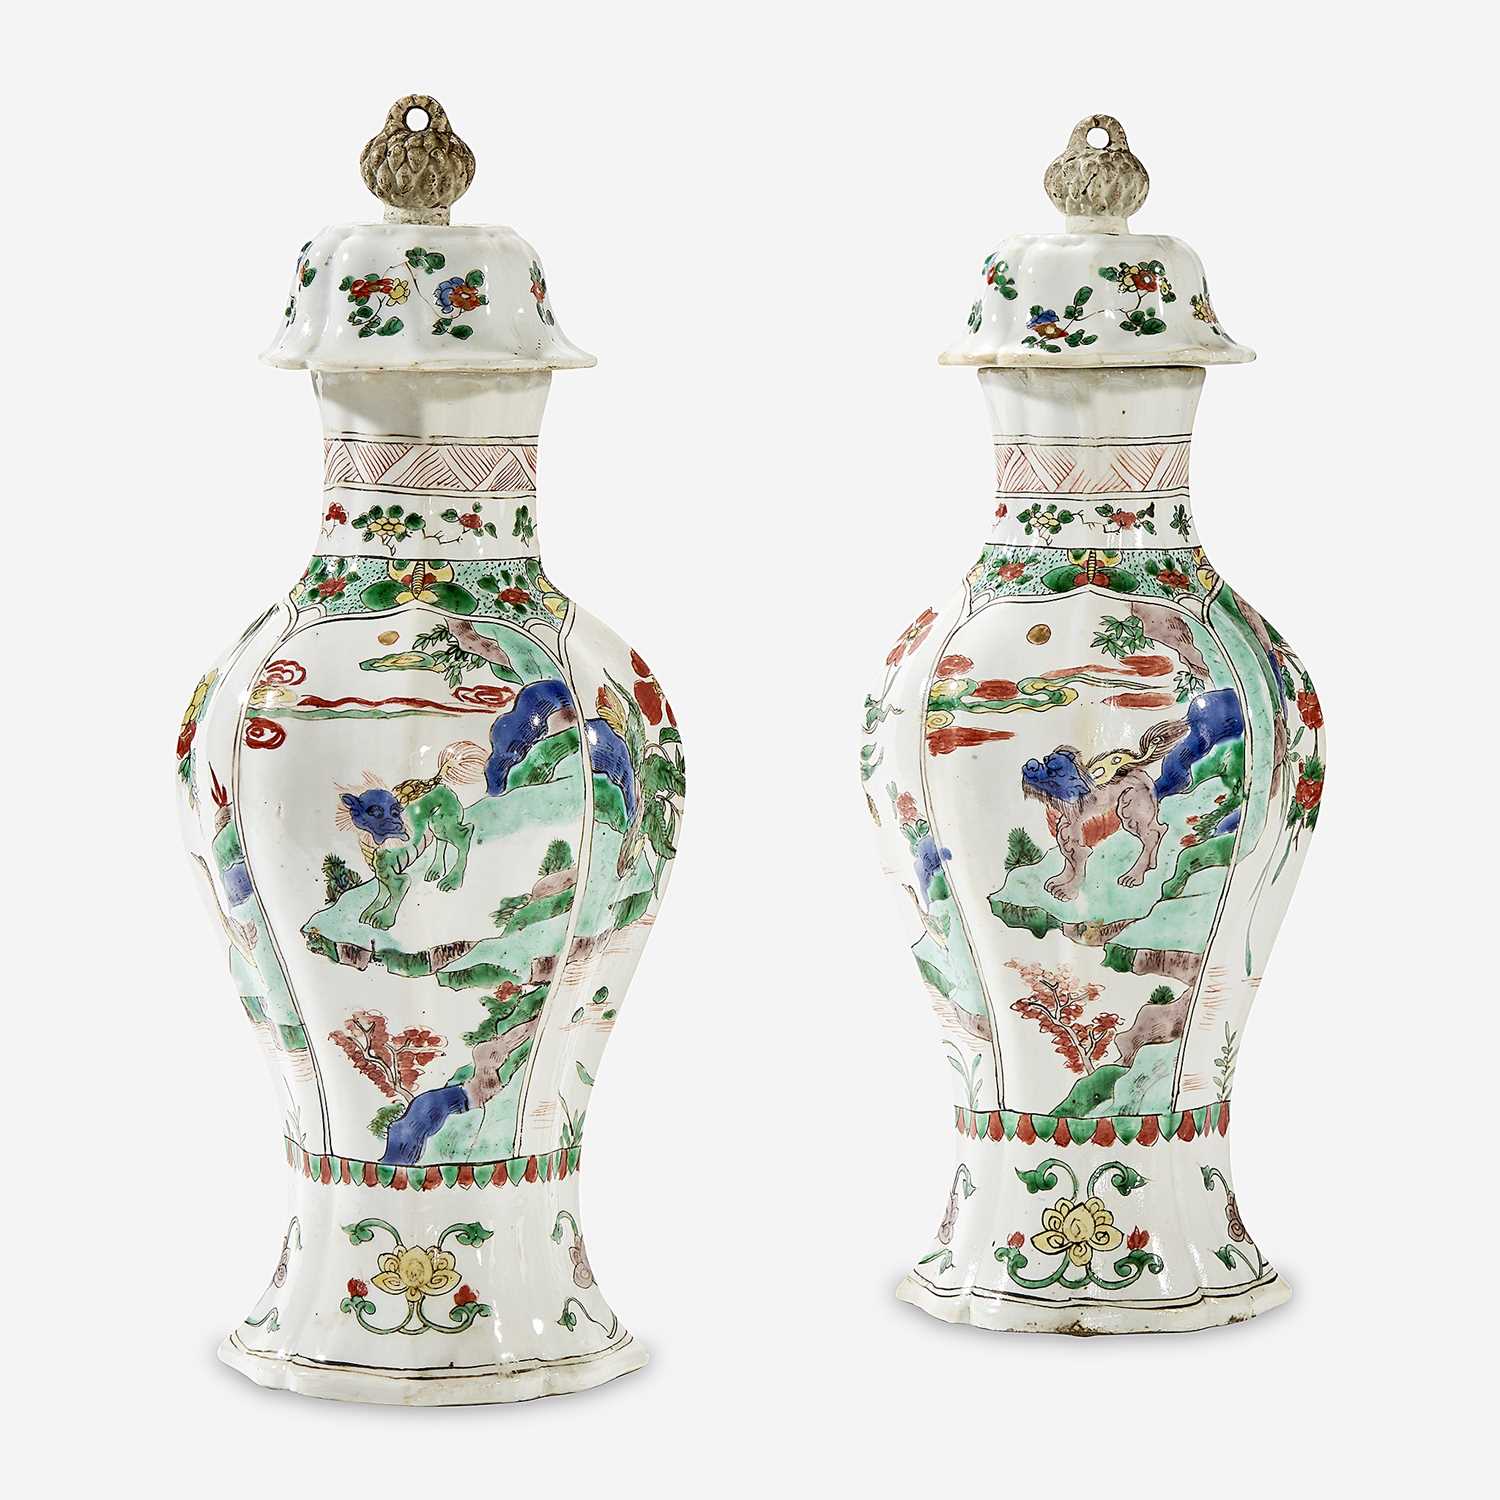 Lot 49 - A pair of Chinese famille verte-decorated porcelain baluster vases and covers